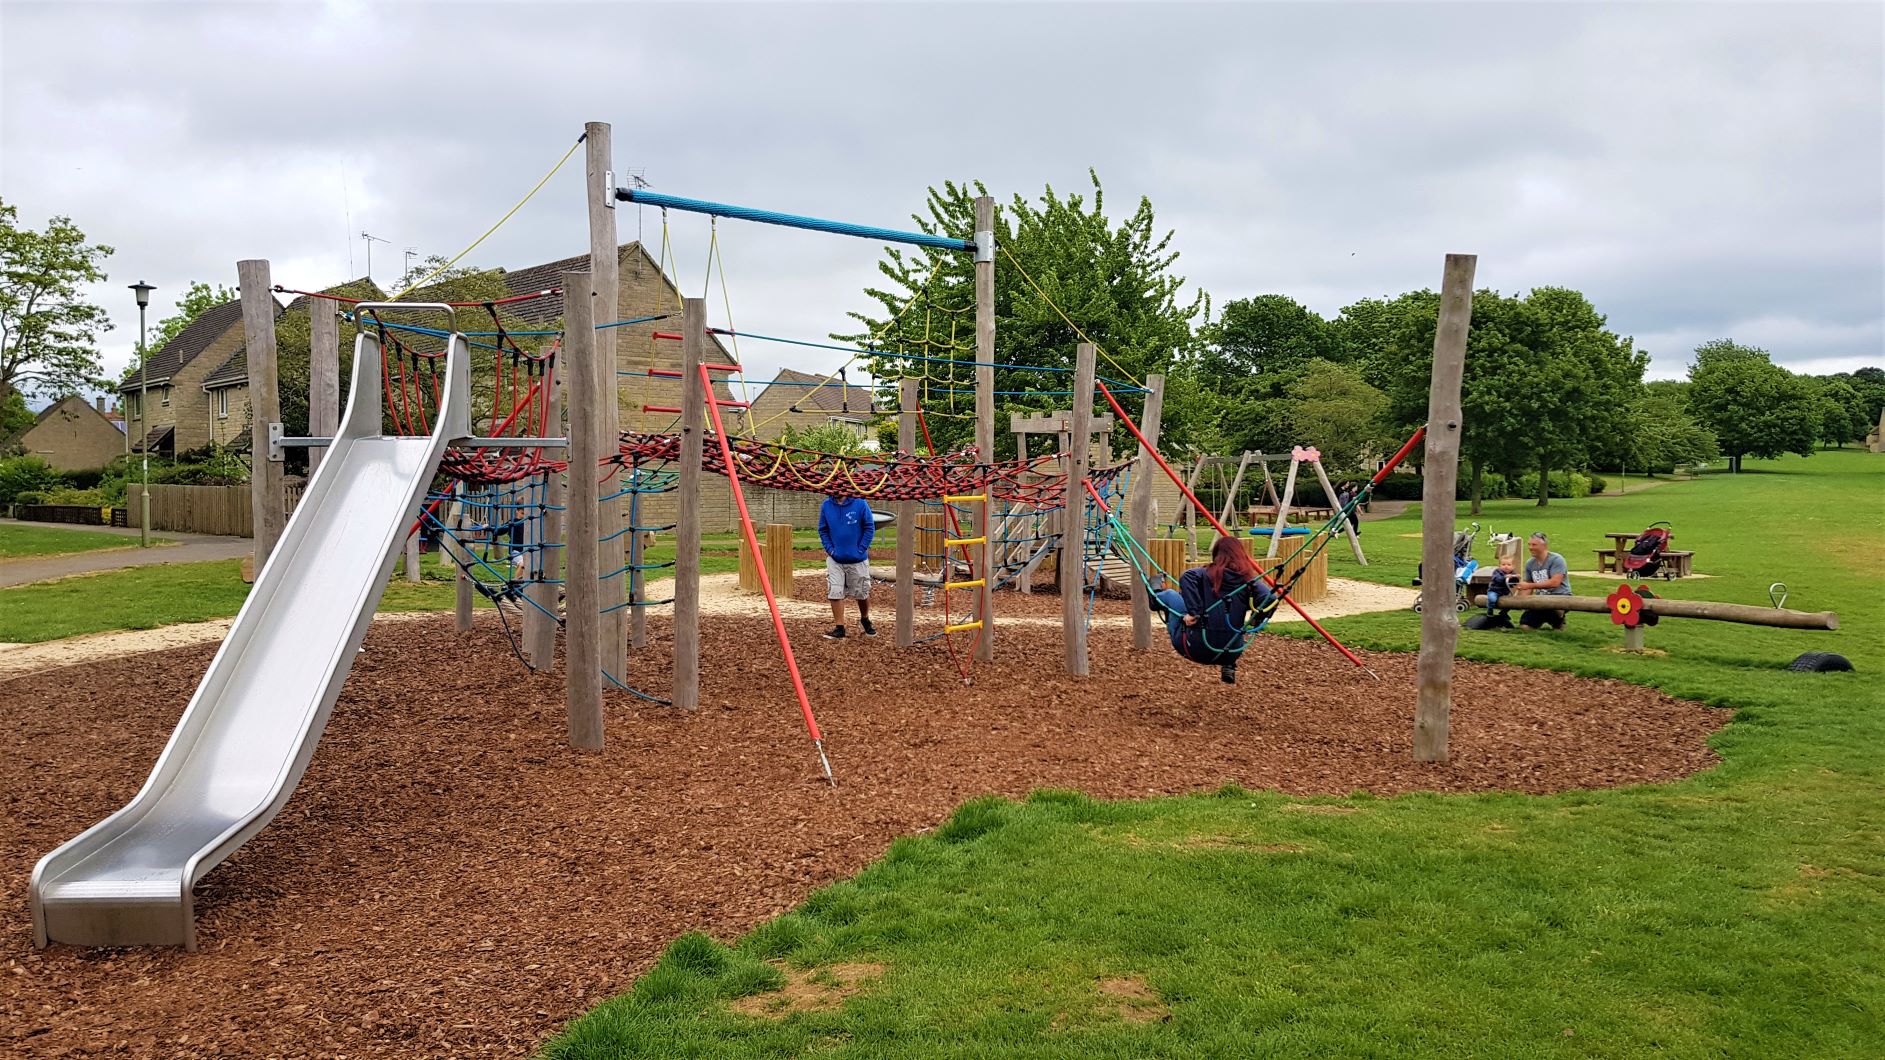 Oxlease play park Witney